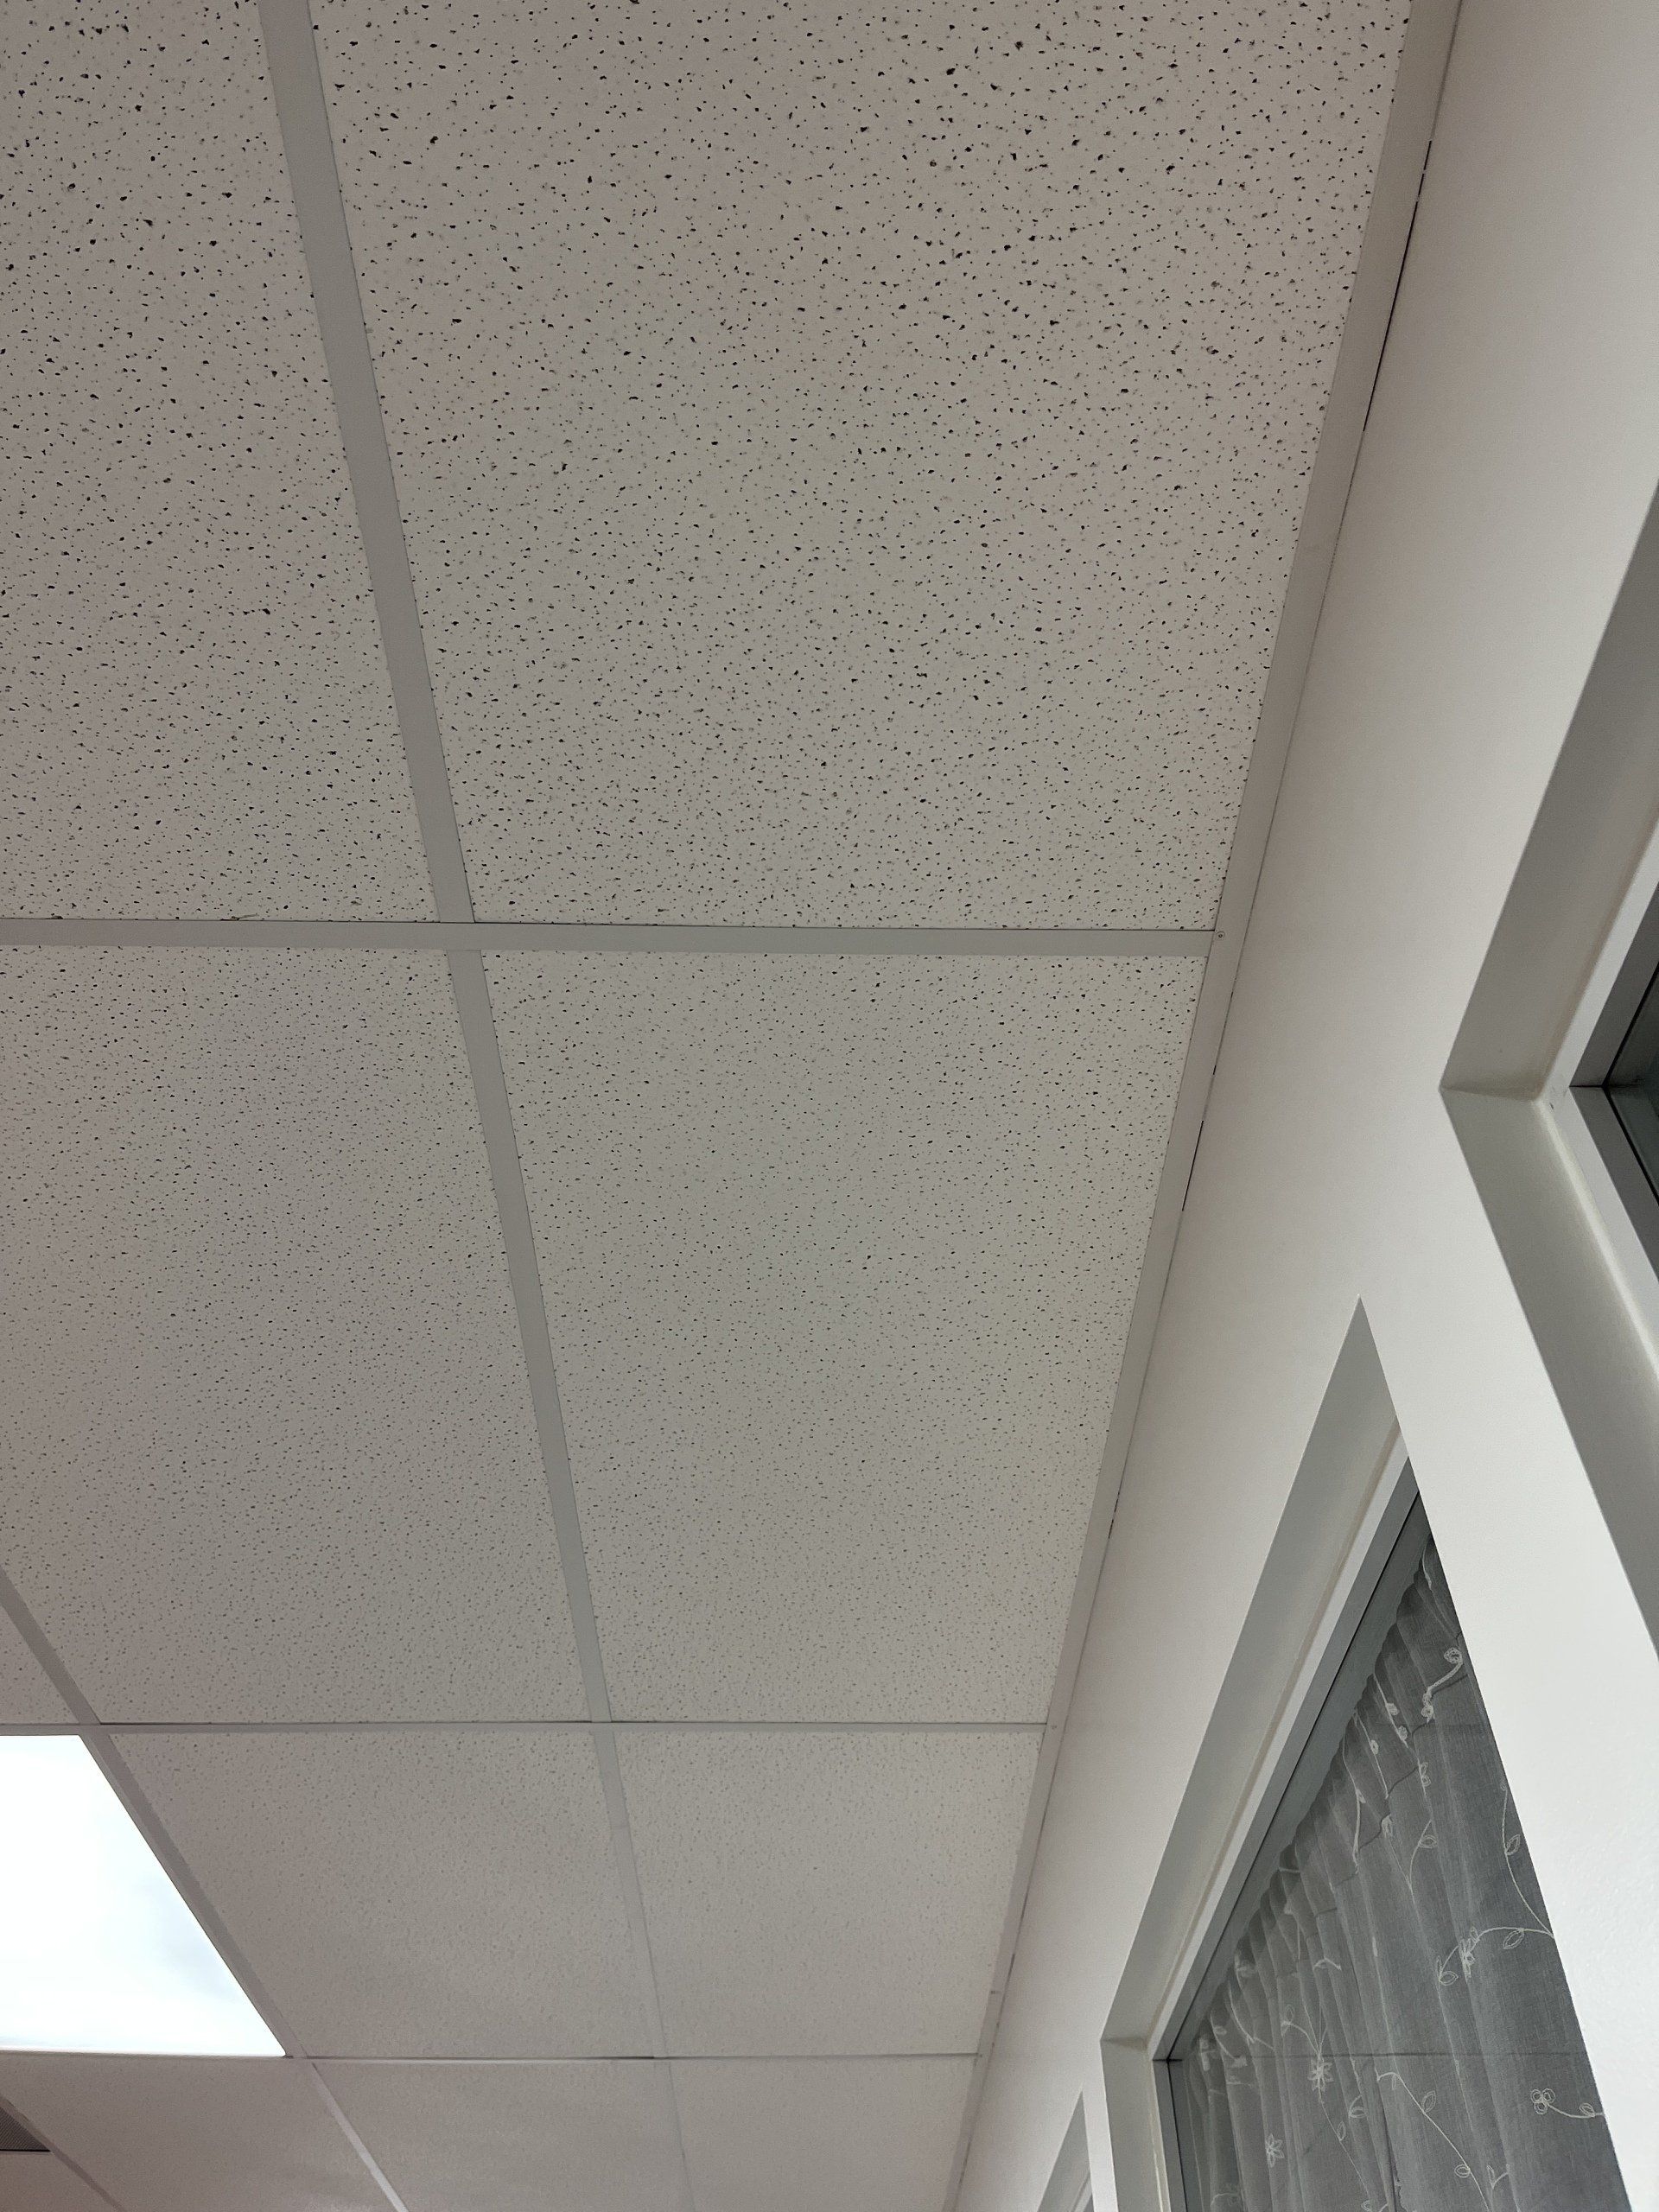 acoustic ceiling panels hung inside office space